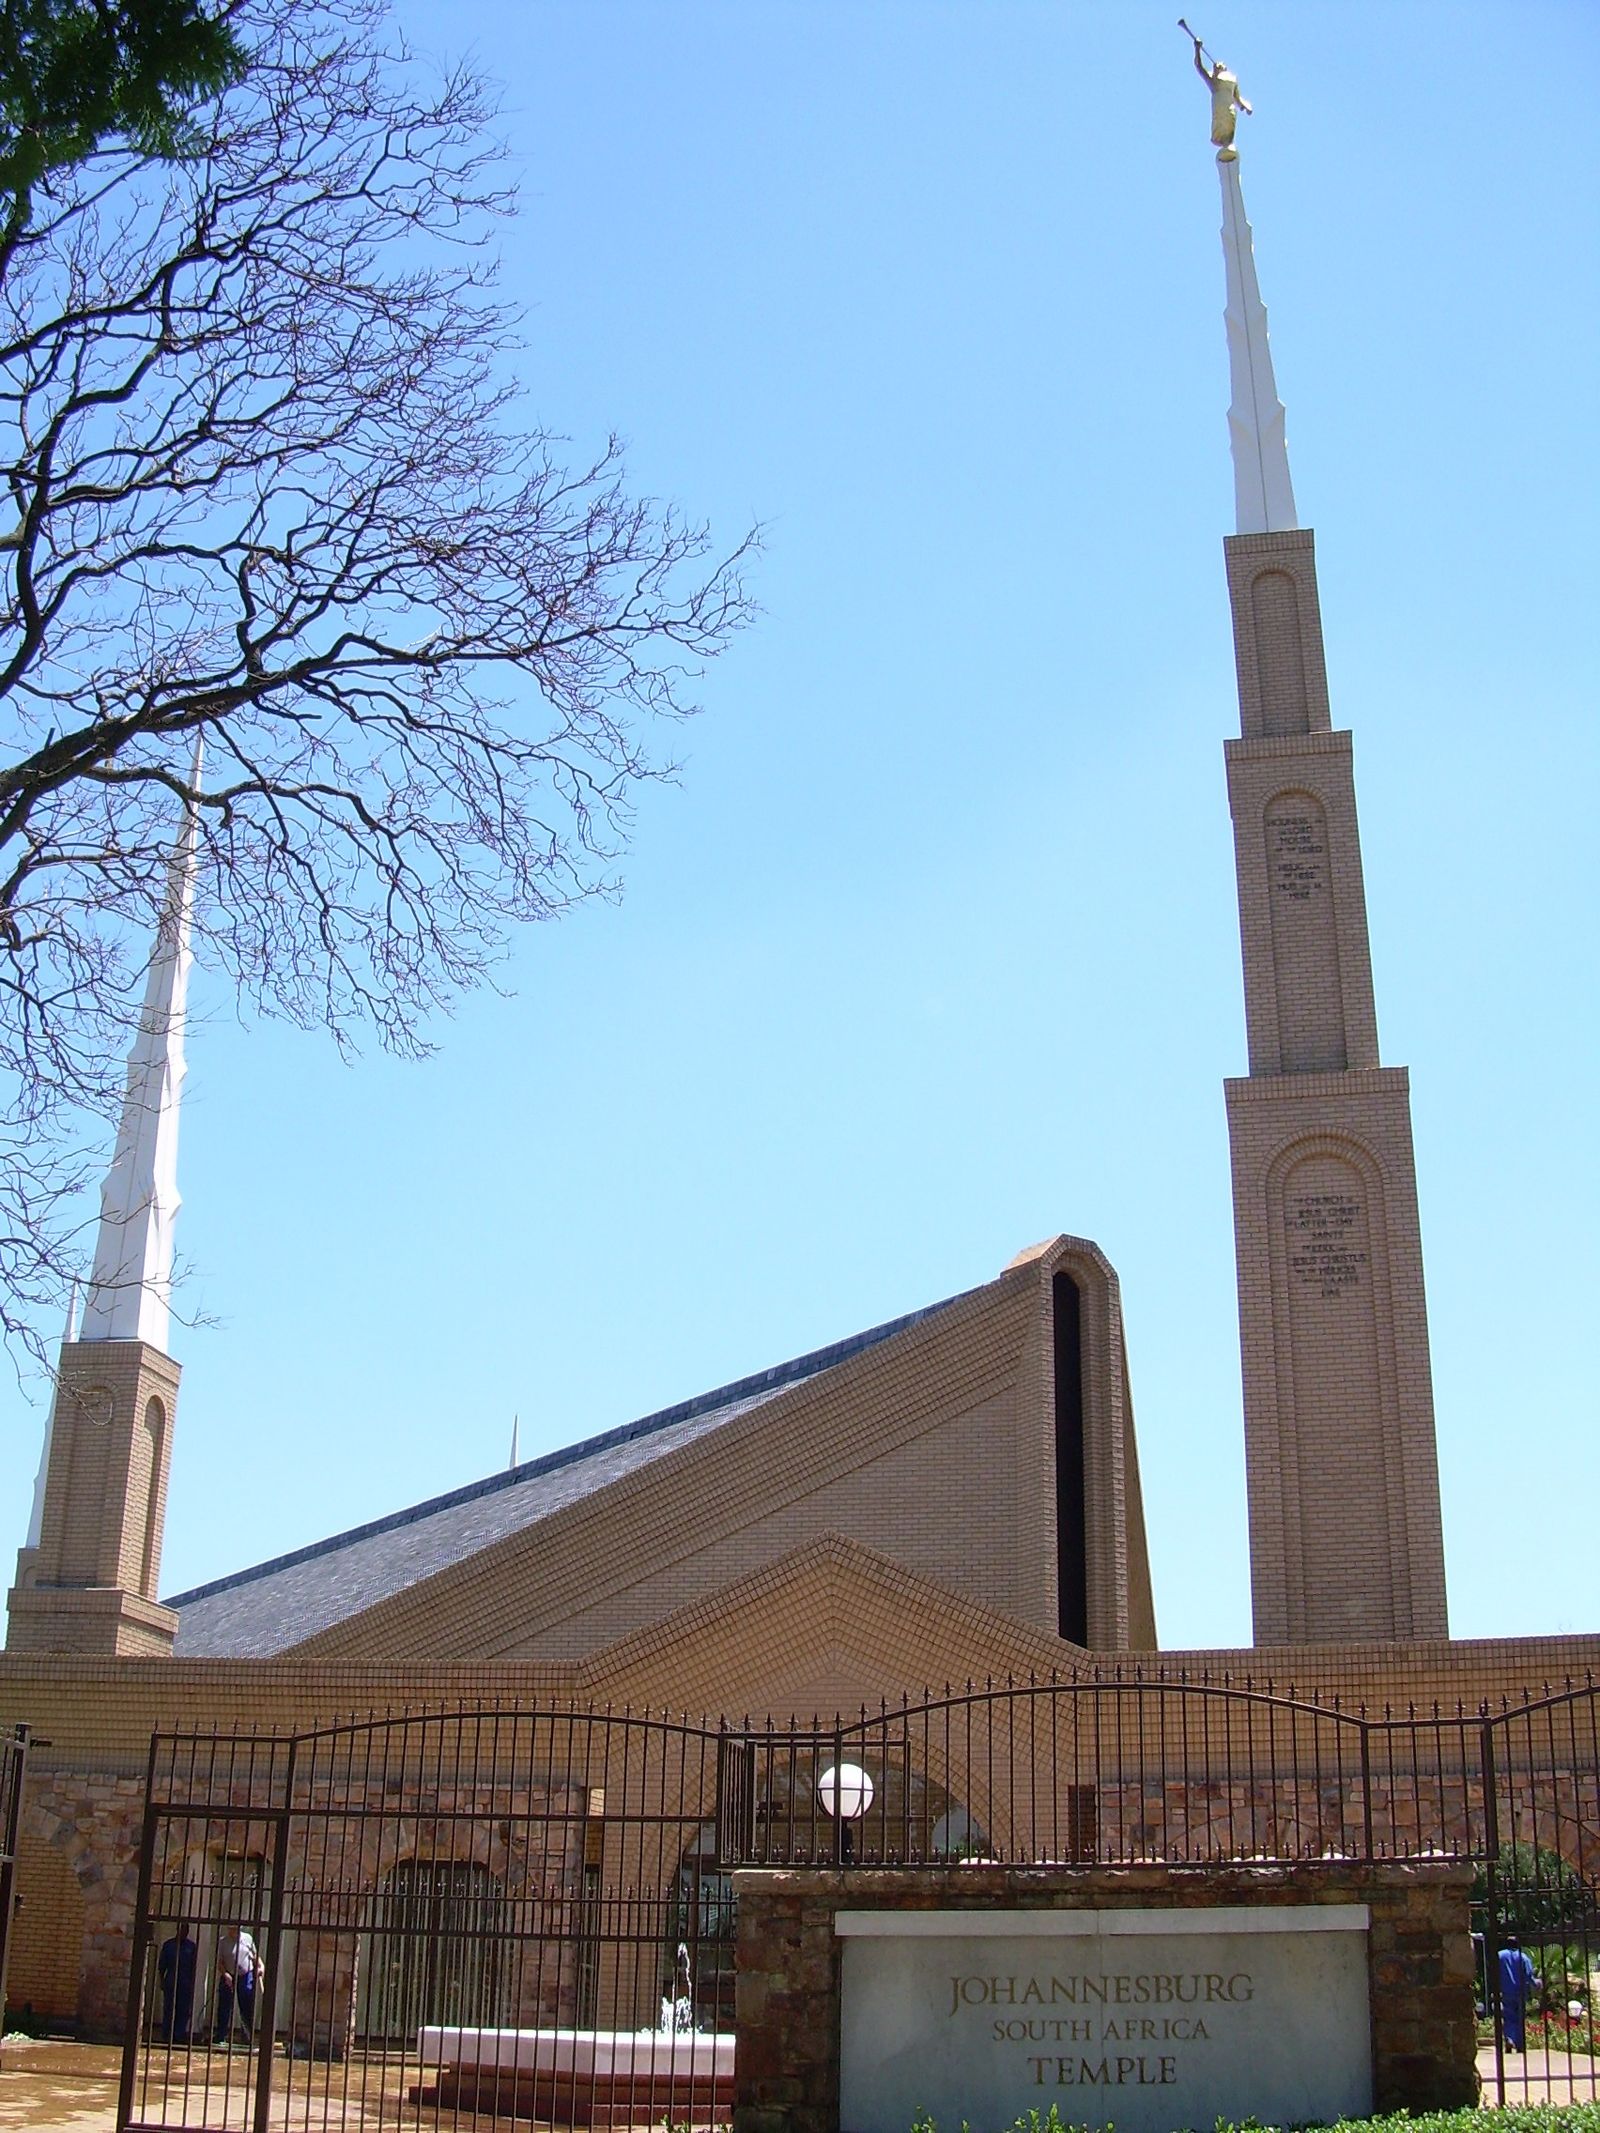 An exterior view of the Johannesburg South Africa Temple.